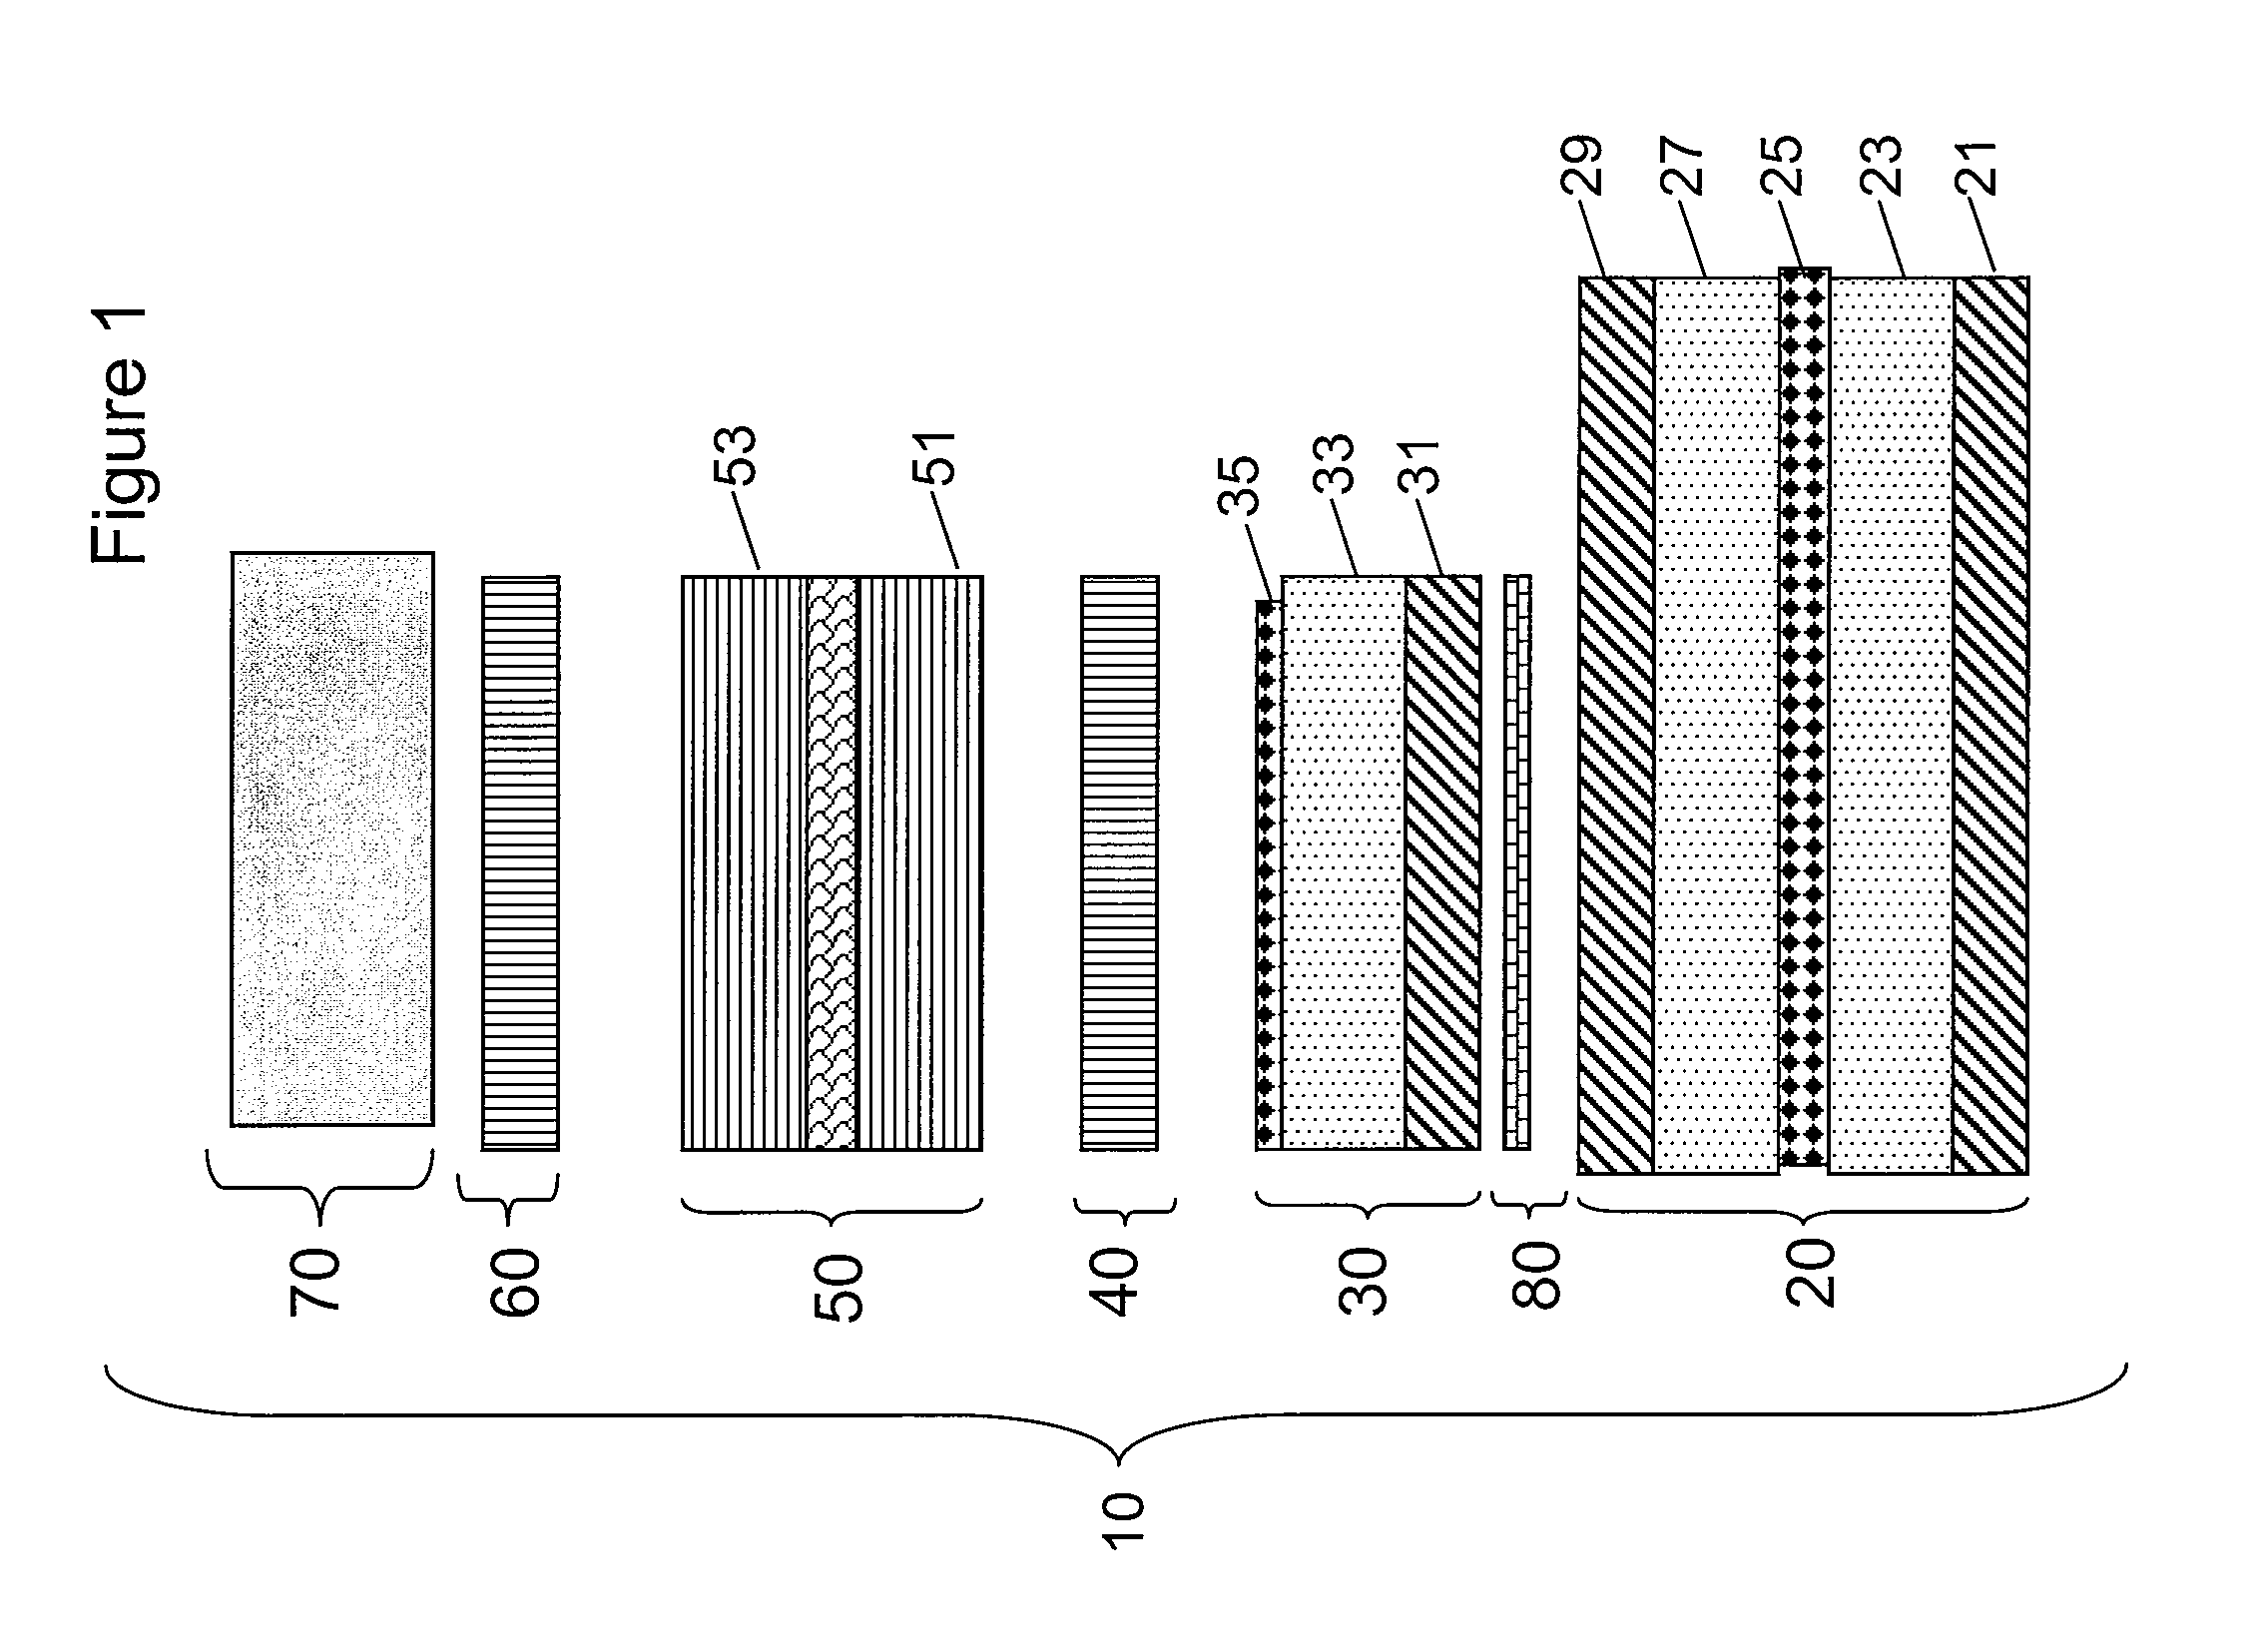 Attachment system of photovoltaic cell to fluoropolymer structural membrane